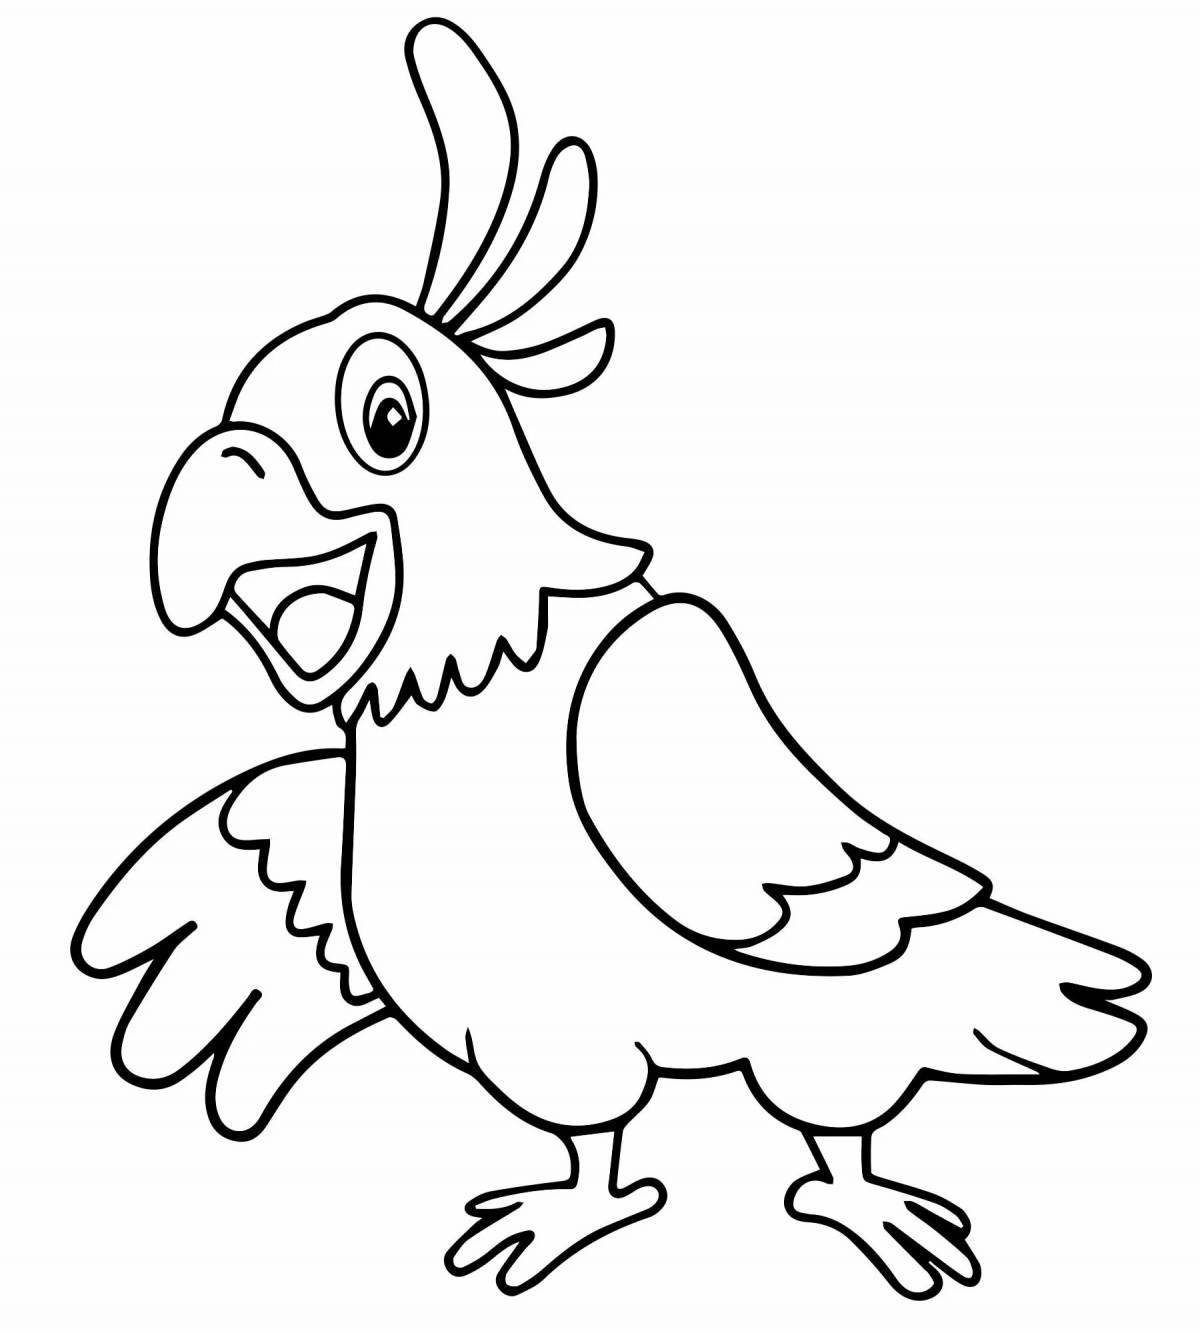 Playful parrot coloring page for kids